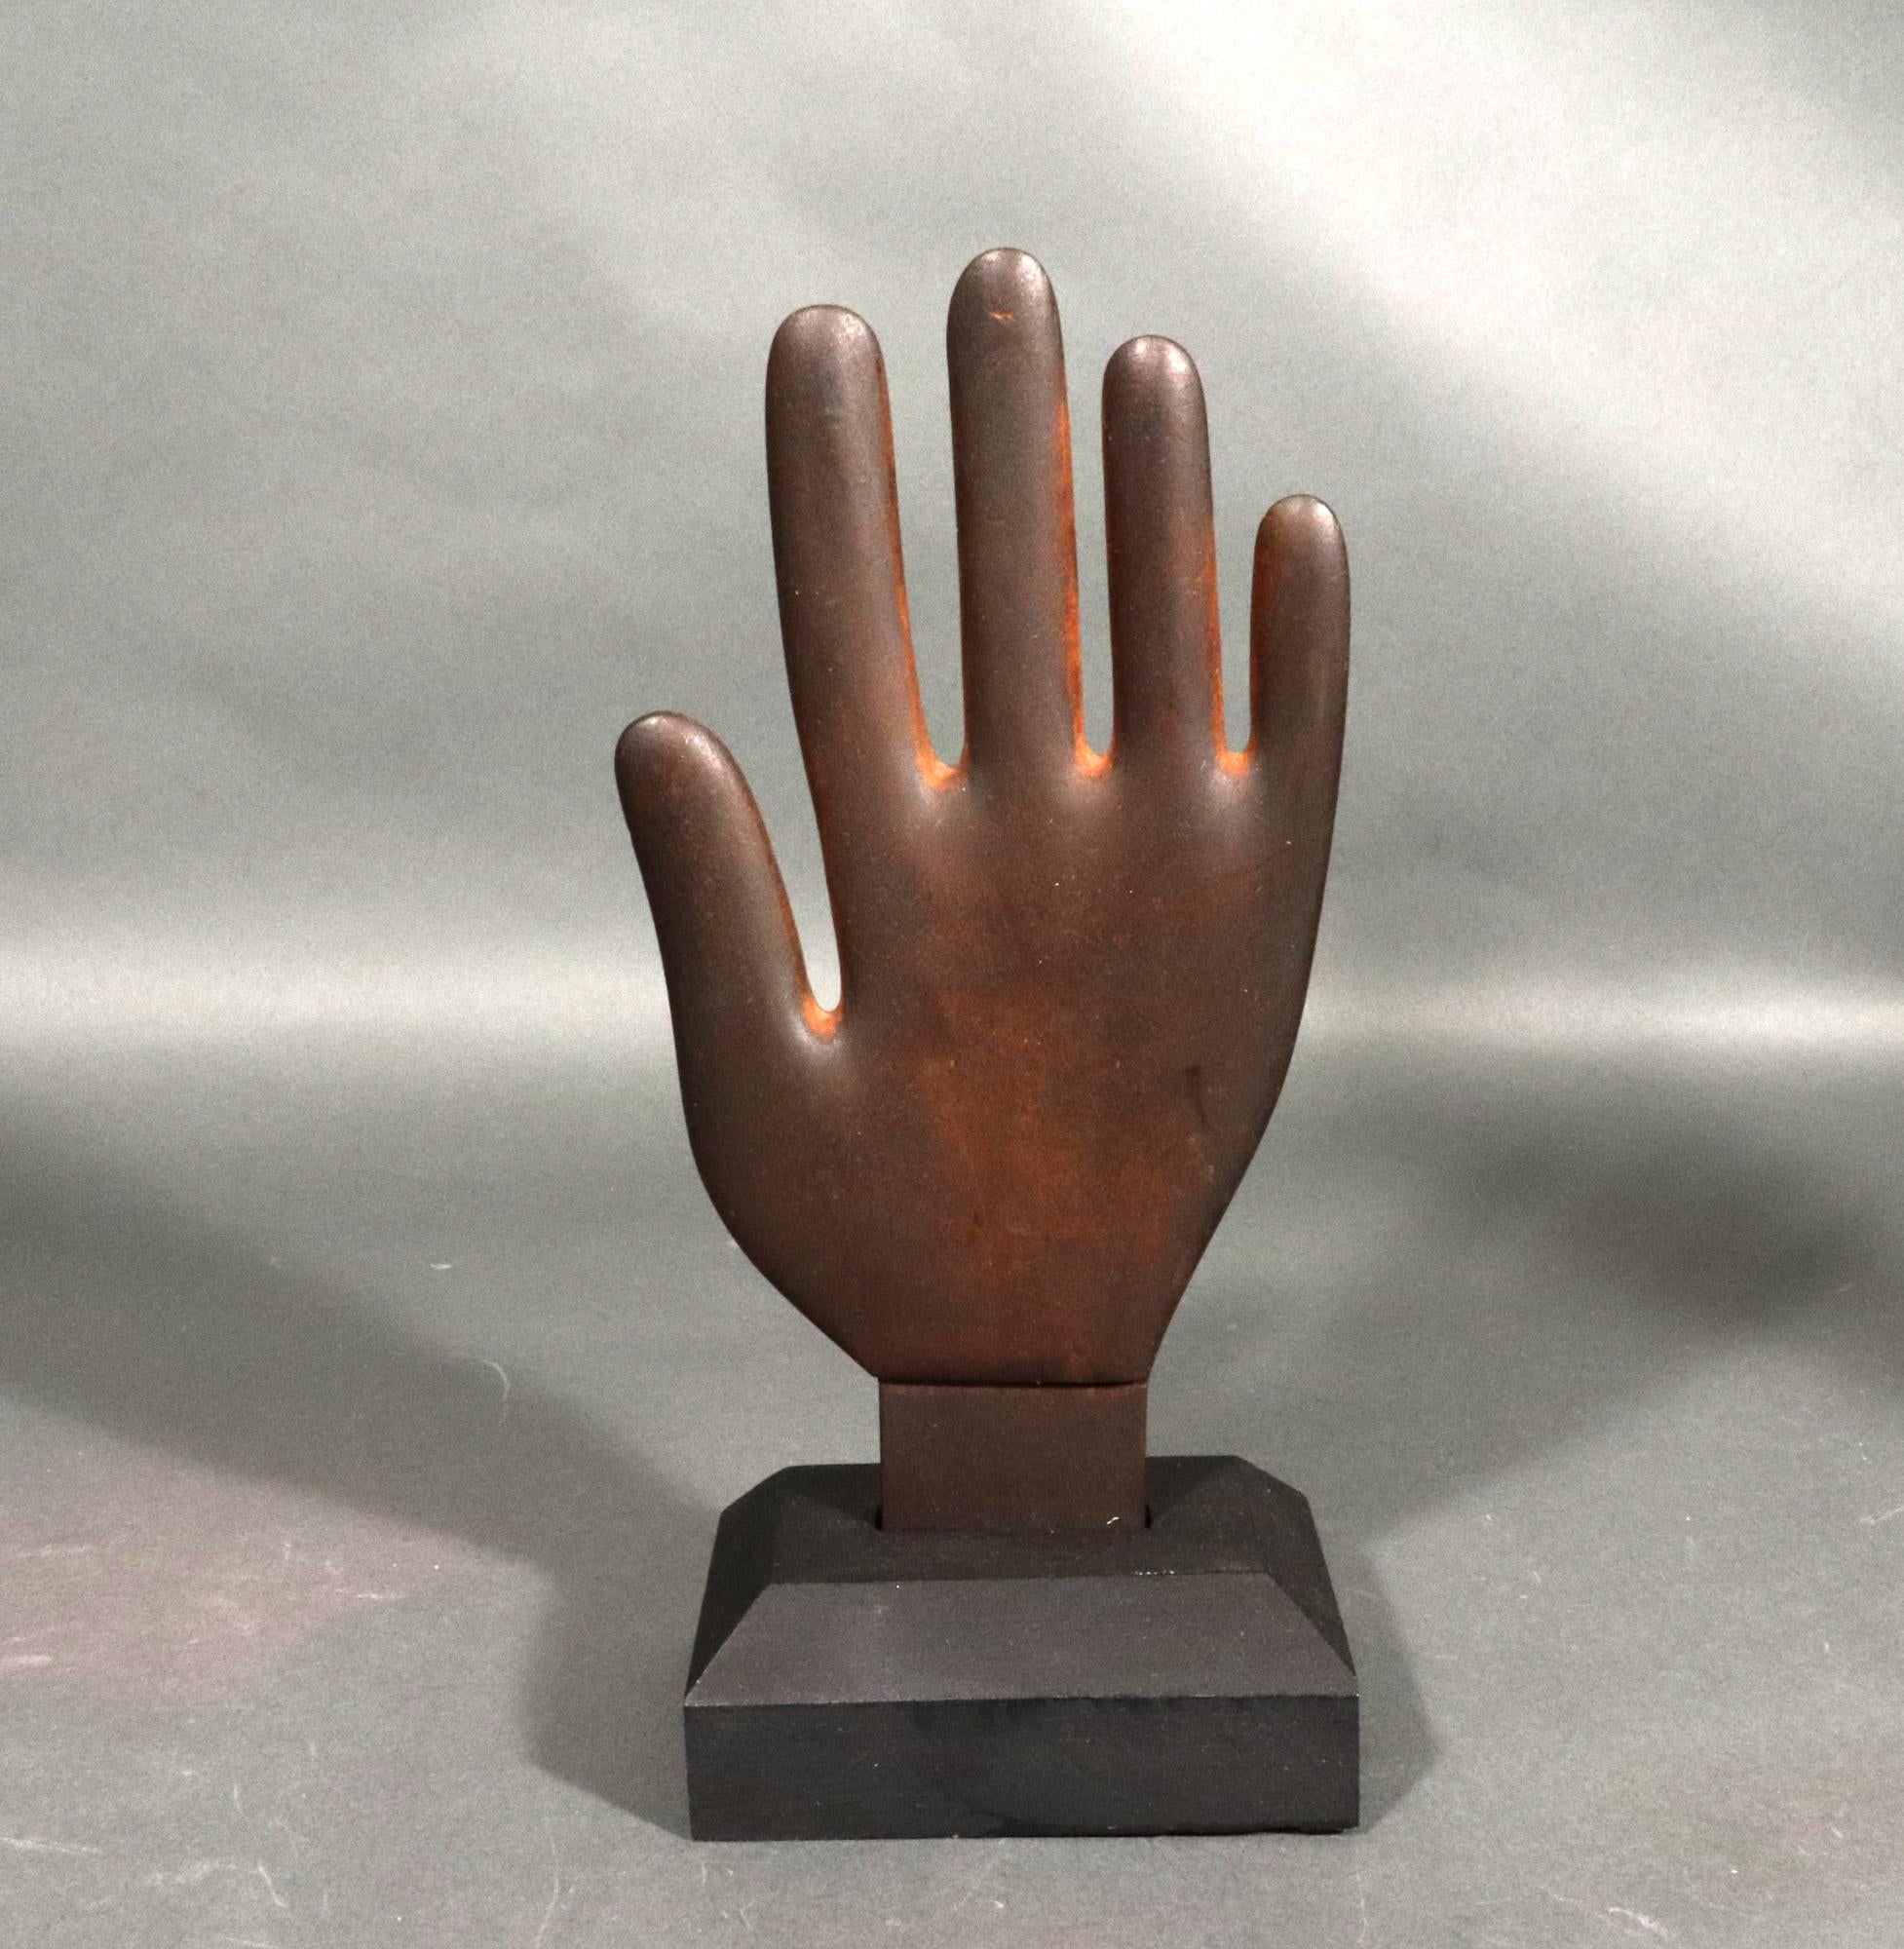 Folk Art Wooden Hand Glove Stretcher,
19th century

The wood model of a hand is mounted on a stepped wood base. The hand has a lovely aged color and is a great piece of folk art.

Dimensions: 10 inches x 5 1/2 inches x 1/2 inch. Base: 4 inches x 3